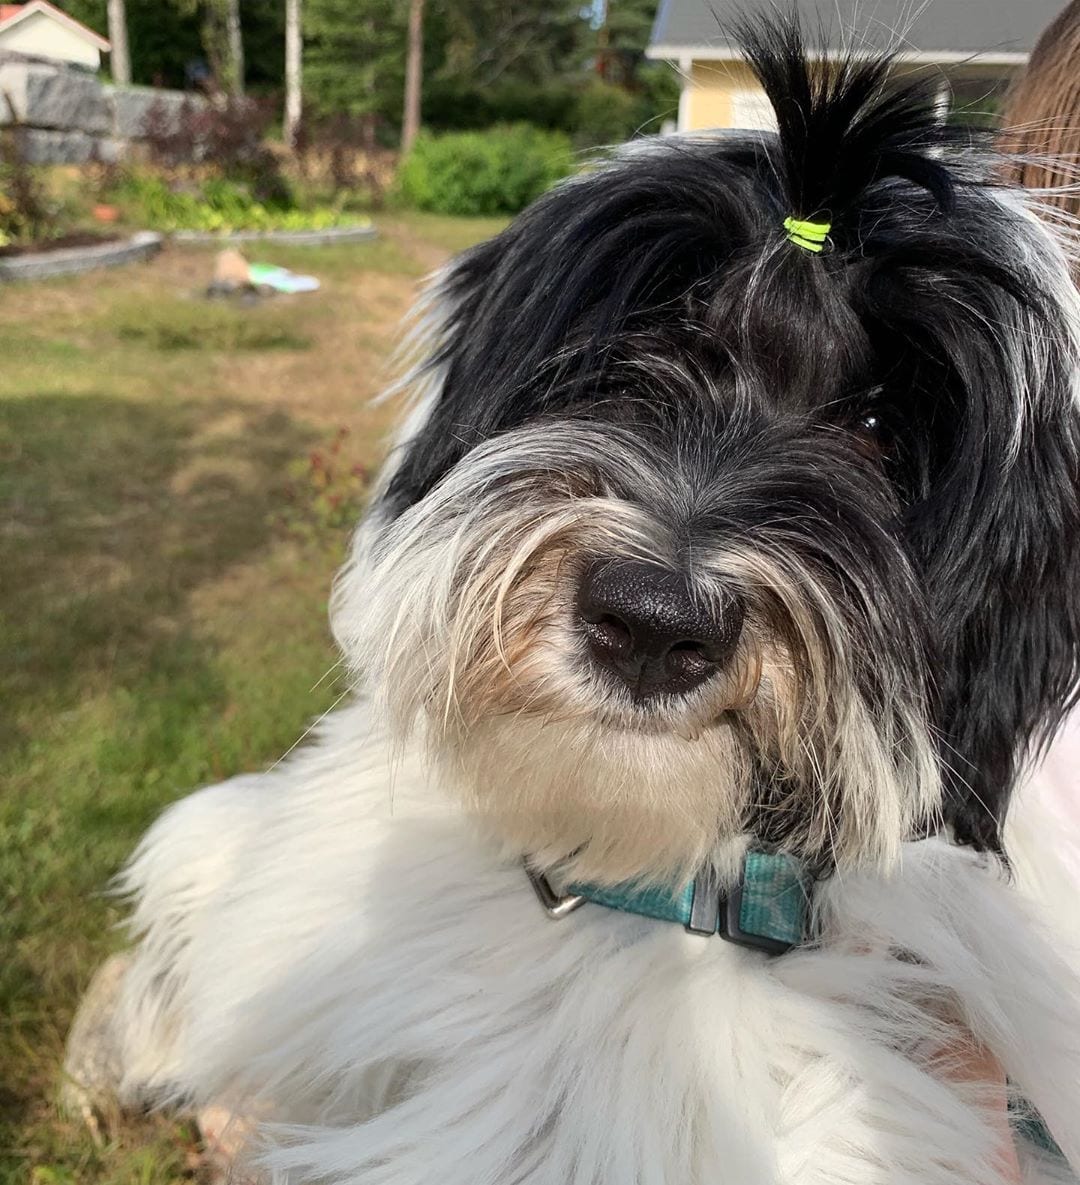 A Tibetan Terrier with a pony tail on top of its head while under the sun in the yard